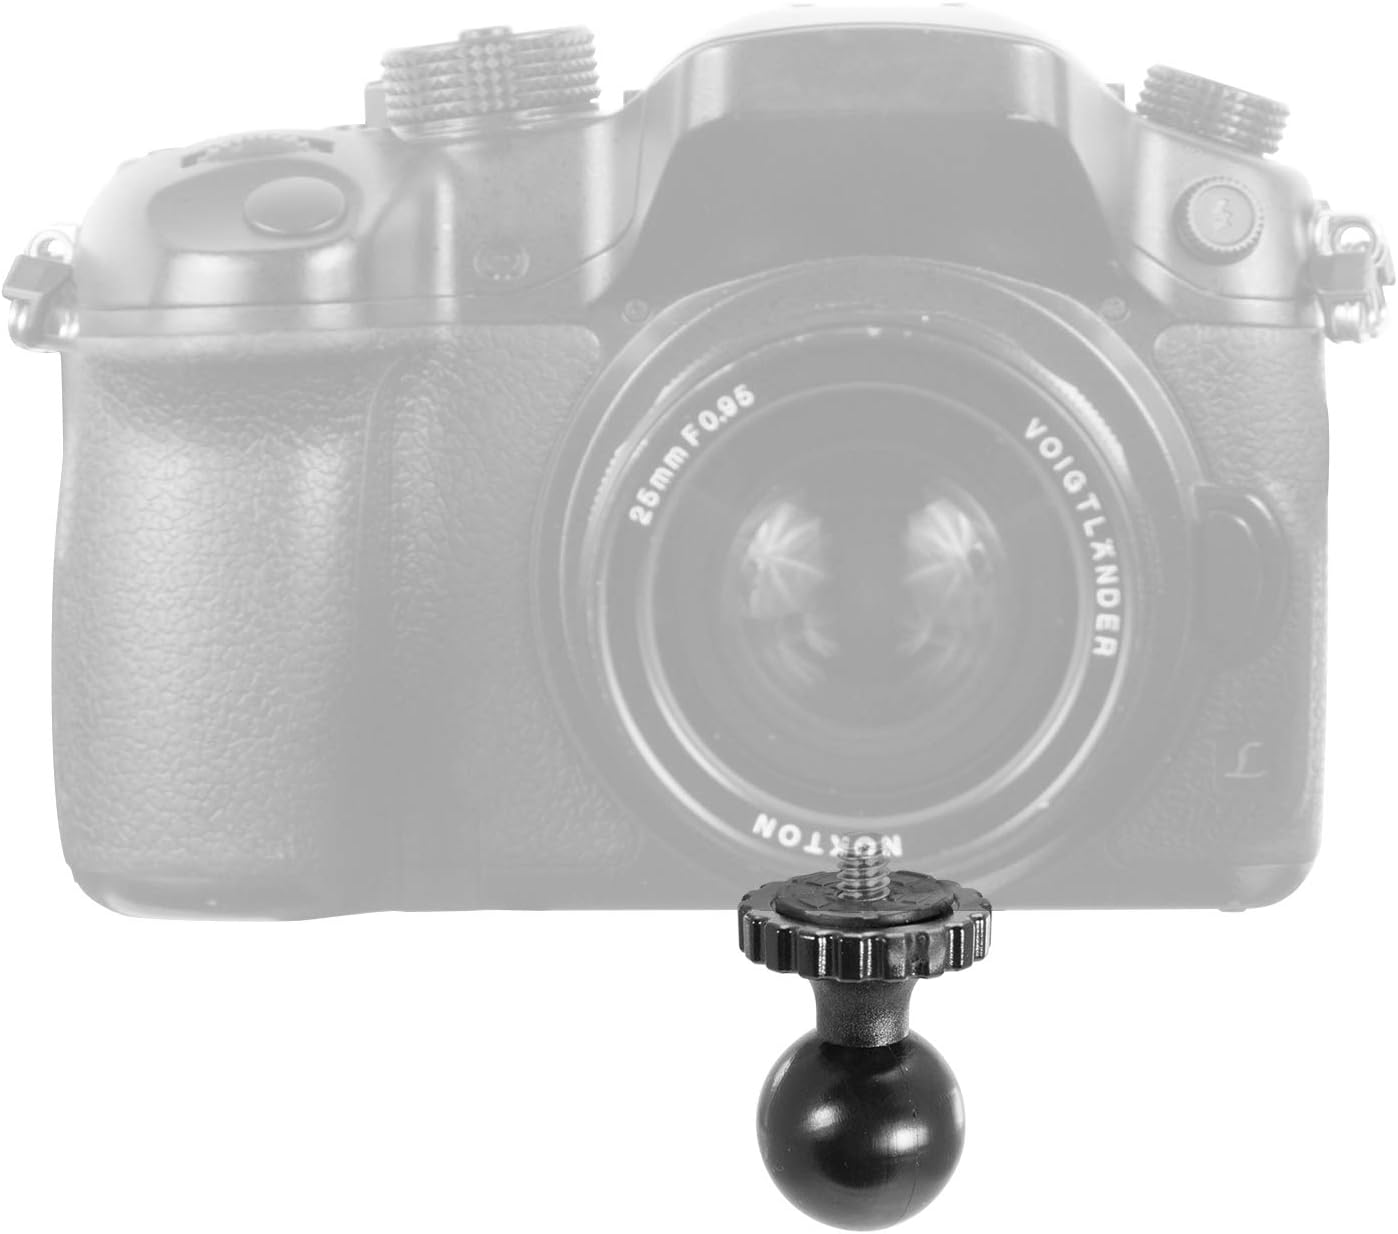 iBOLT Action Camera / ¼ inch 20 Dual BizMount Cup Holder Mount